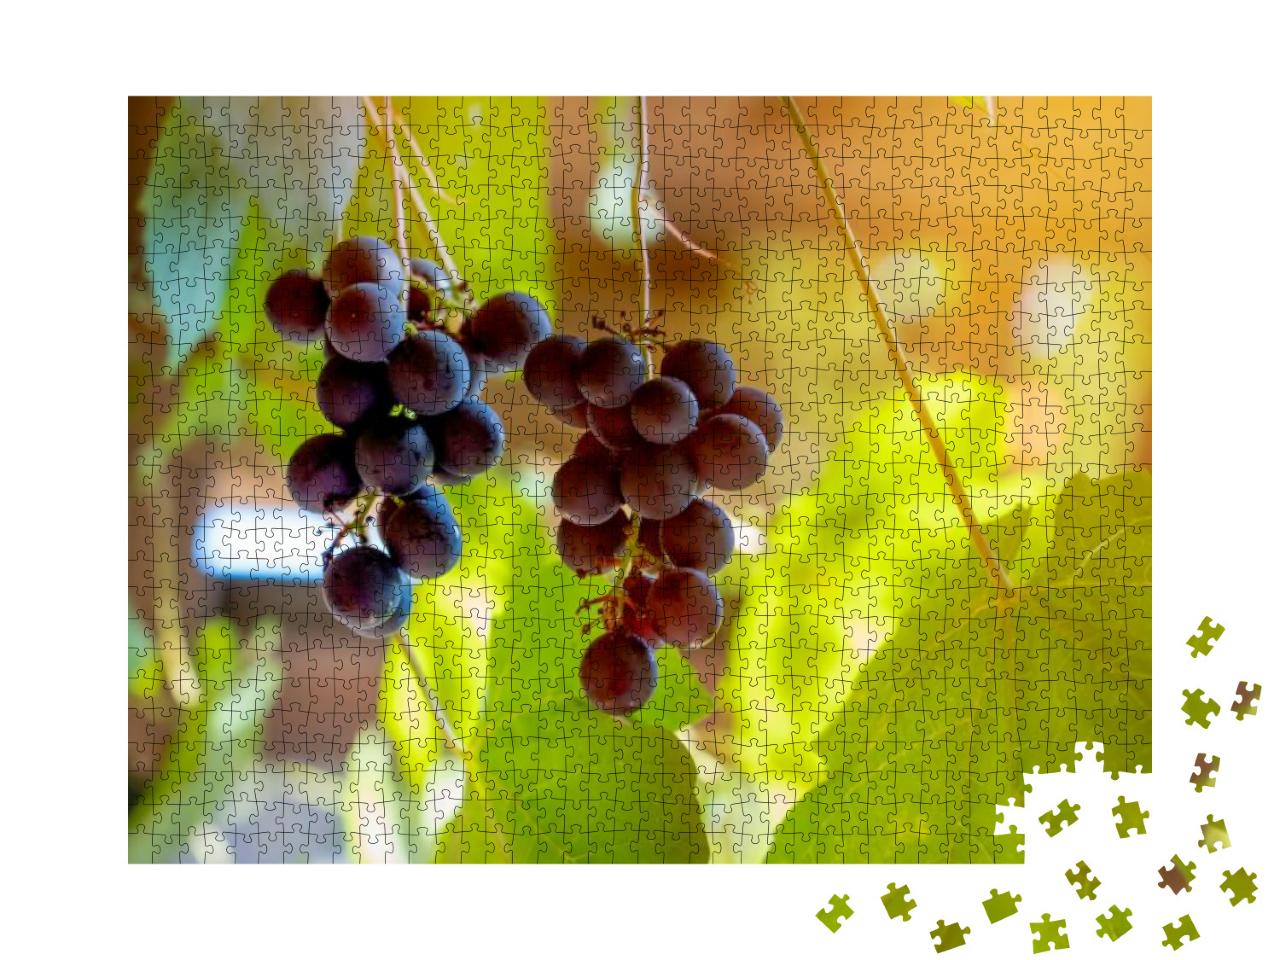 Vineyard. Large Bunches of Ripe Wine Grapes Hang from Old... Jigsaw Puzzle with 1000 pieces